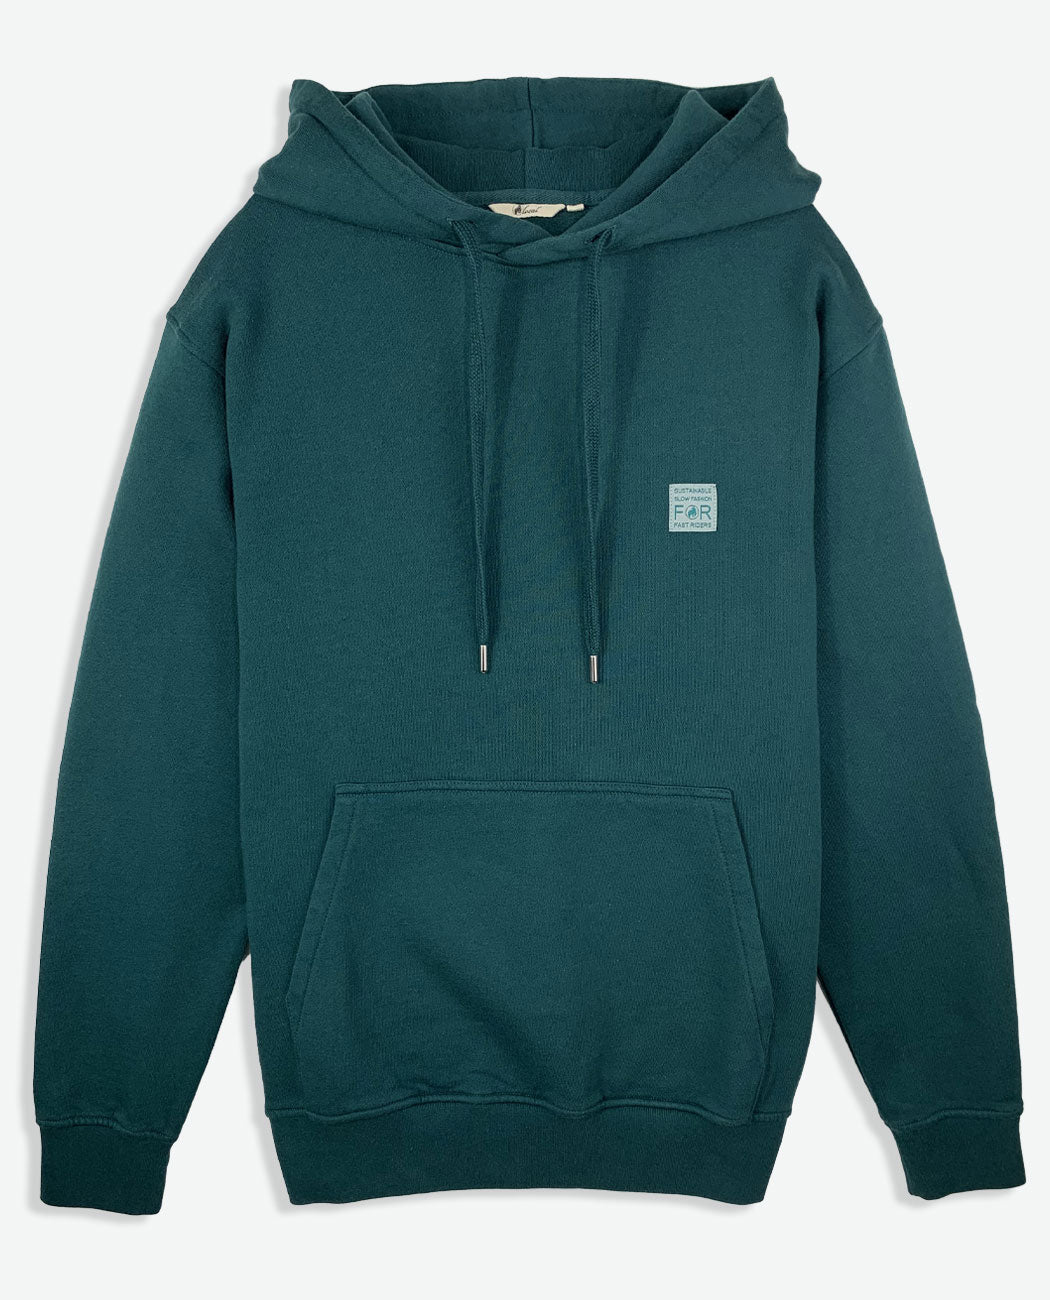 Hooded Sweater "Statement"